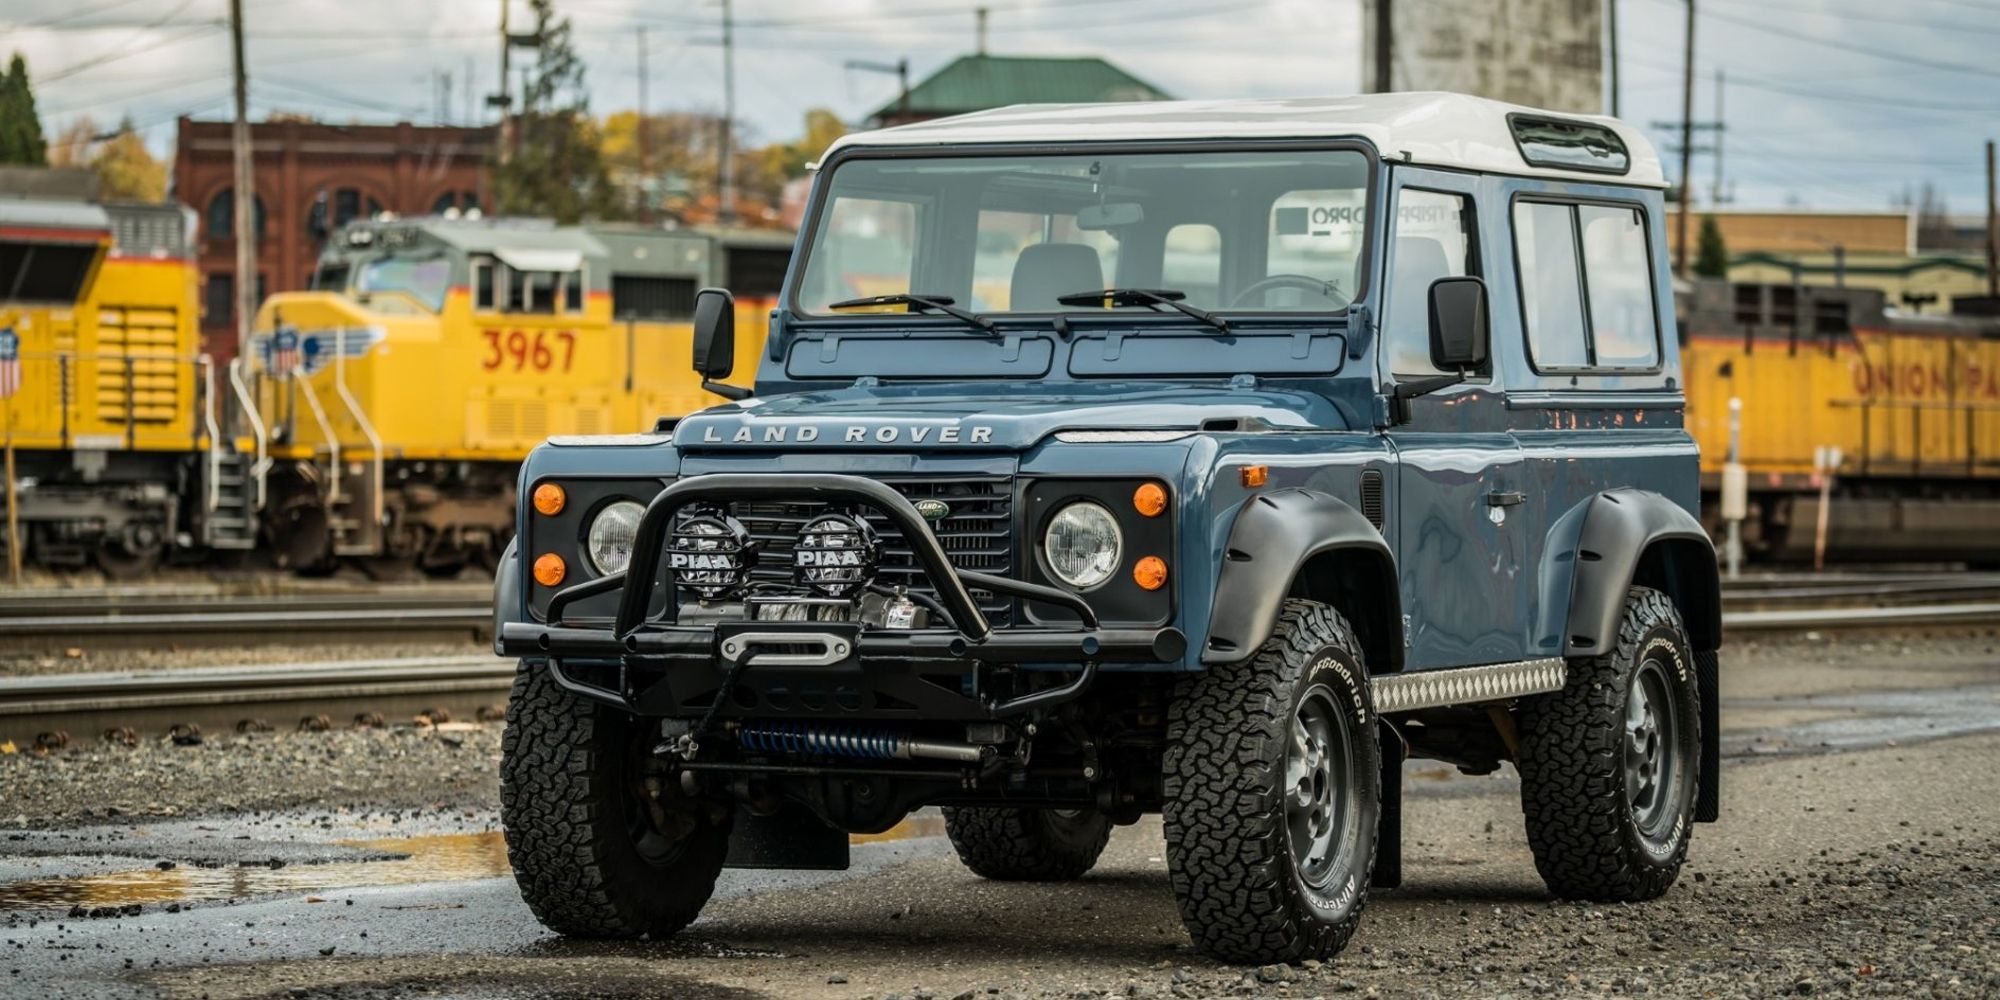 A Defender 90 with off-road accessories